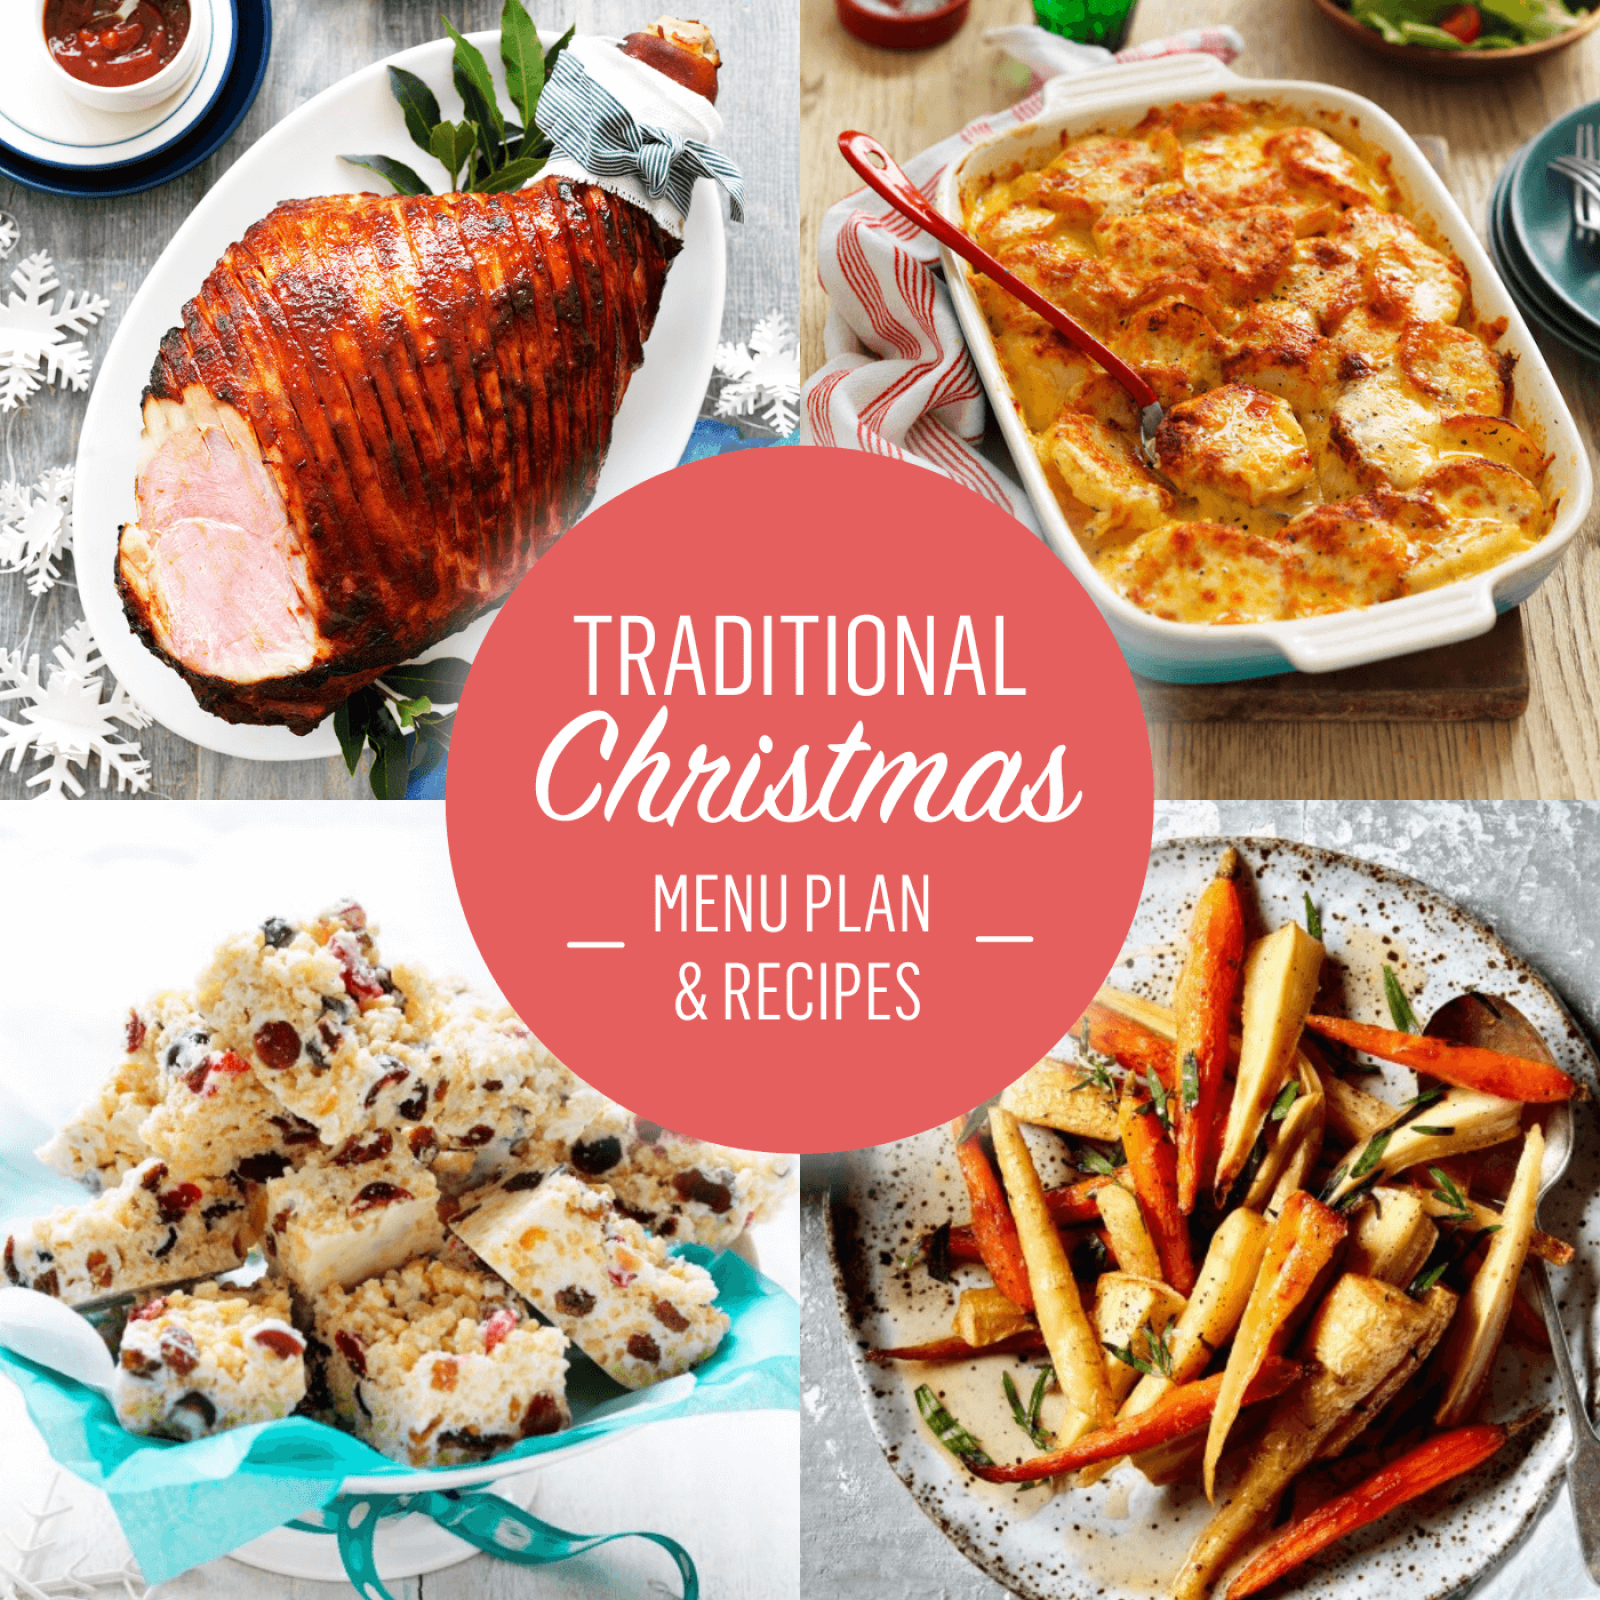 https://myfoodbook.com.au/sites/default/files/styles/1x1/public/collections_image/traditional%20christmas%20menu%20plan%202021_0.png